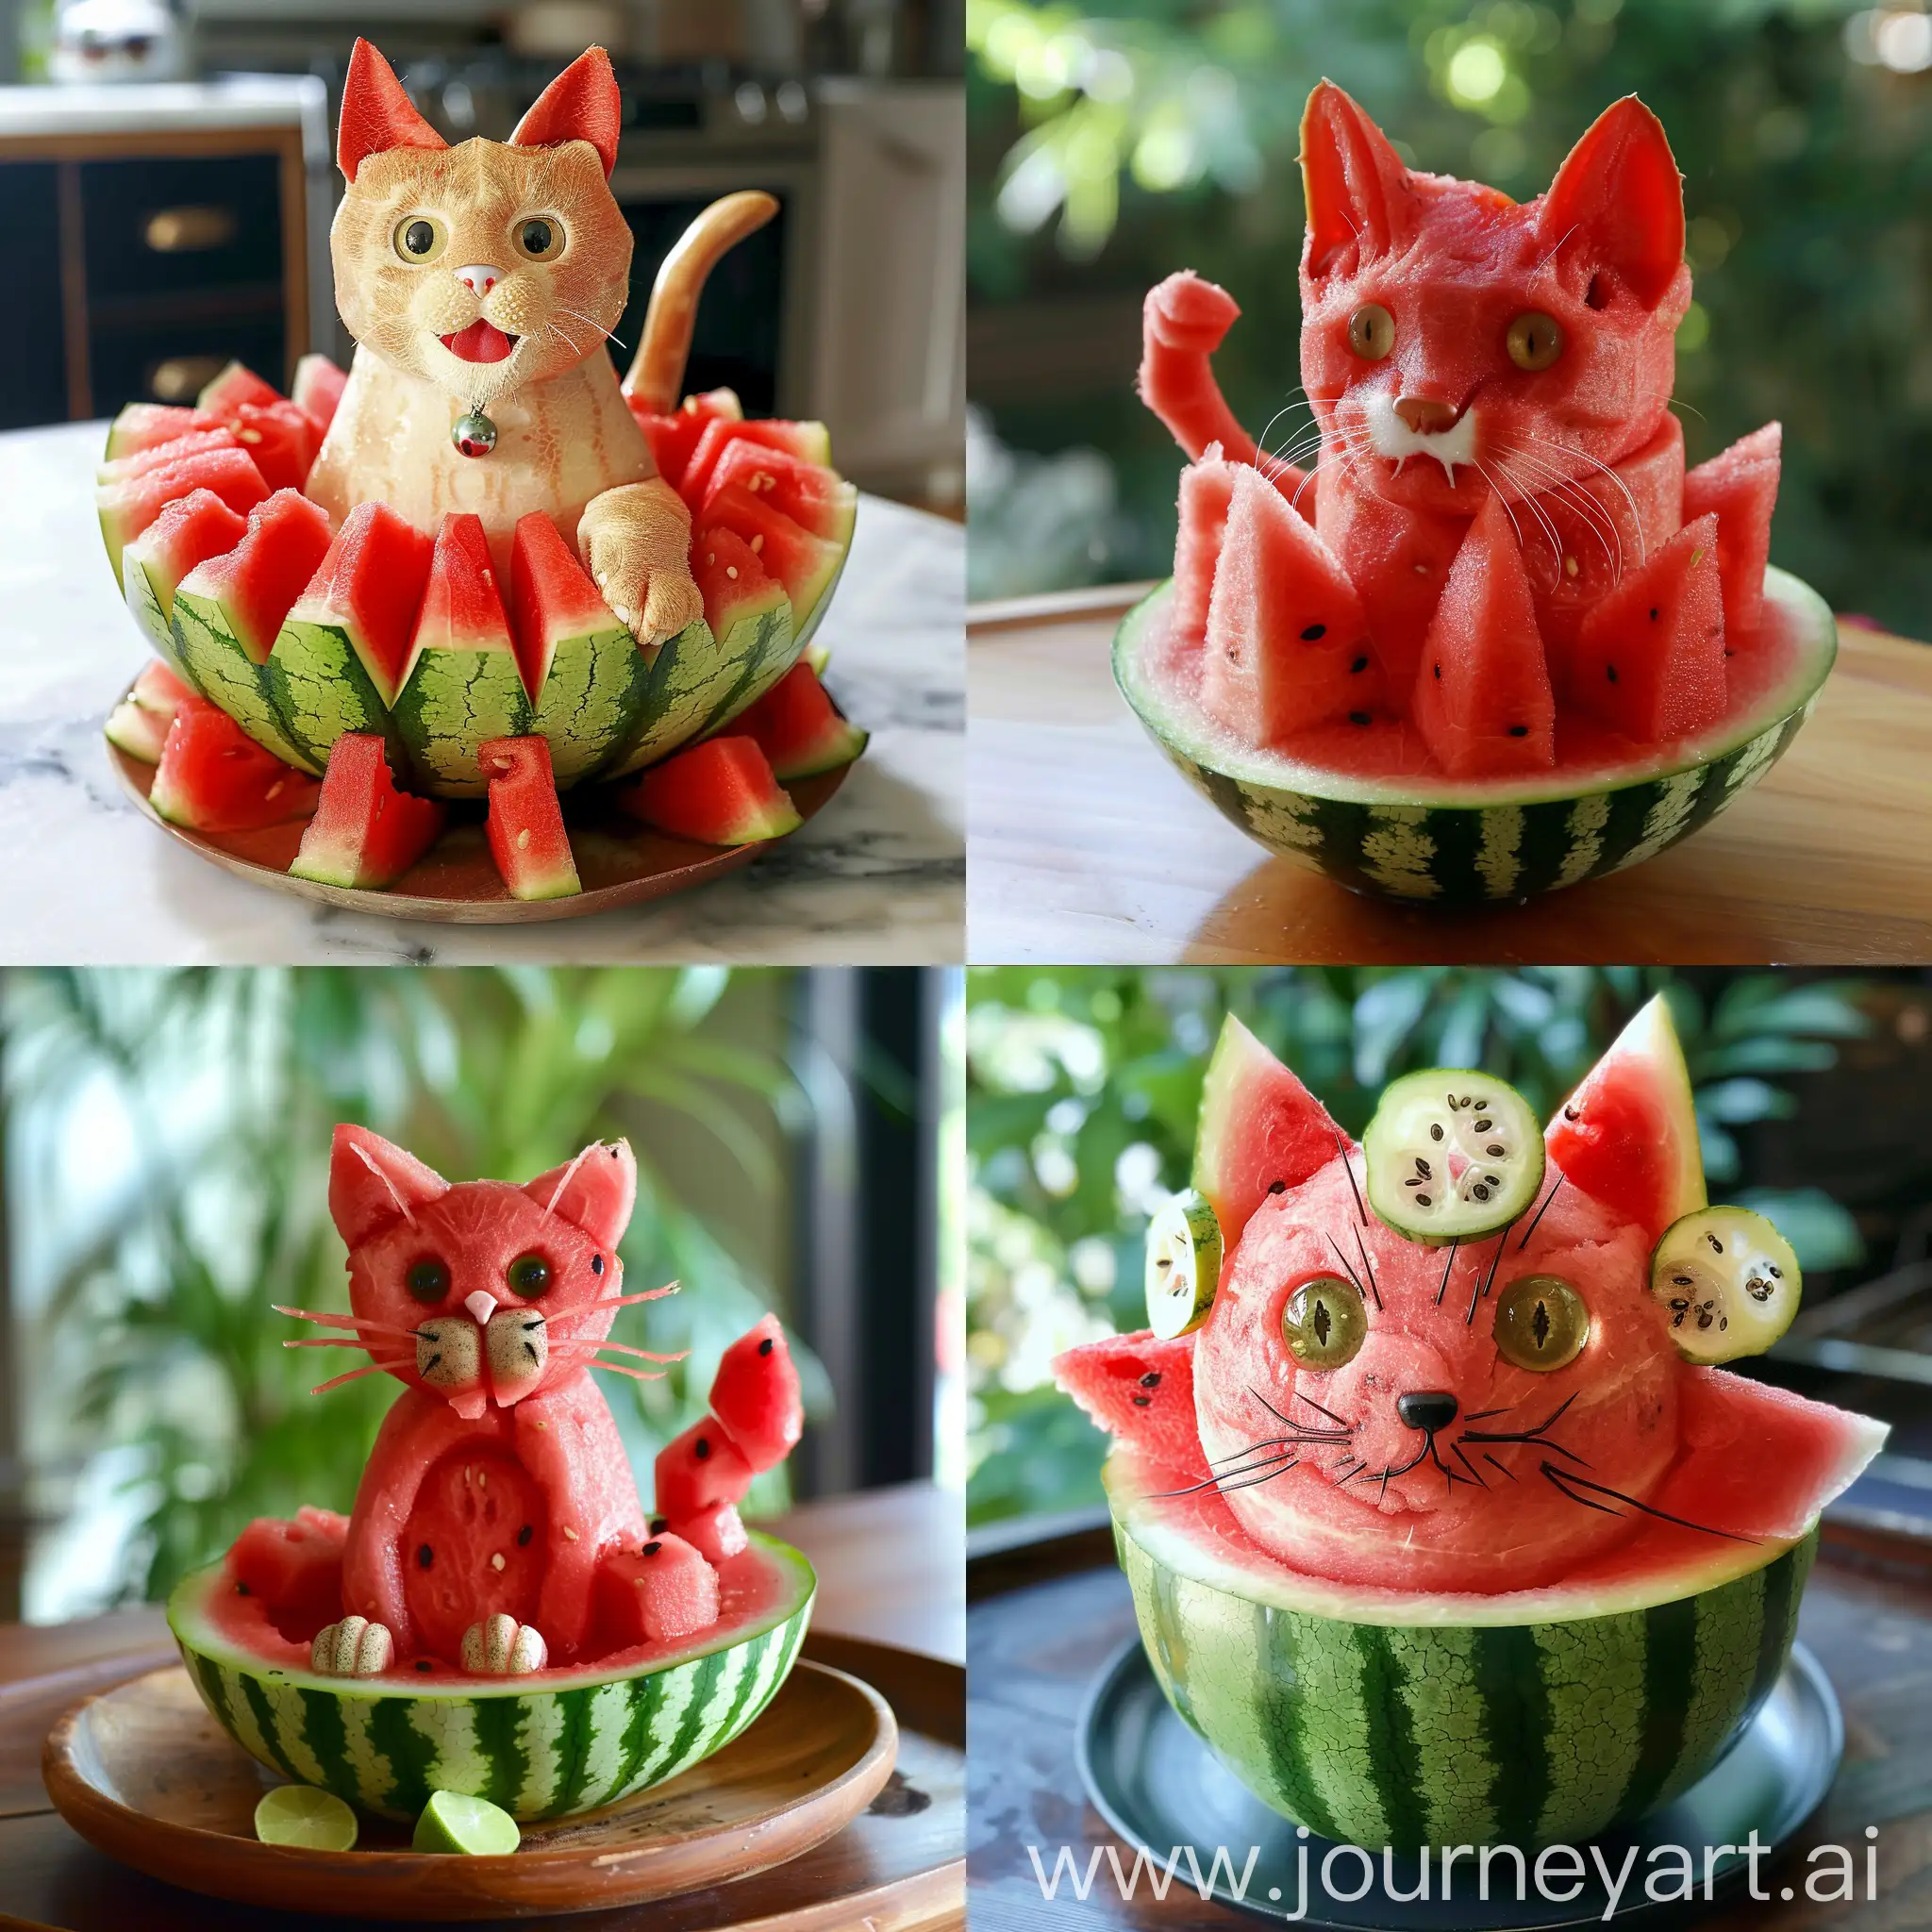 Playful-Cat-Emerging-from-Watermelon